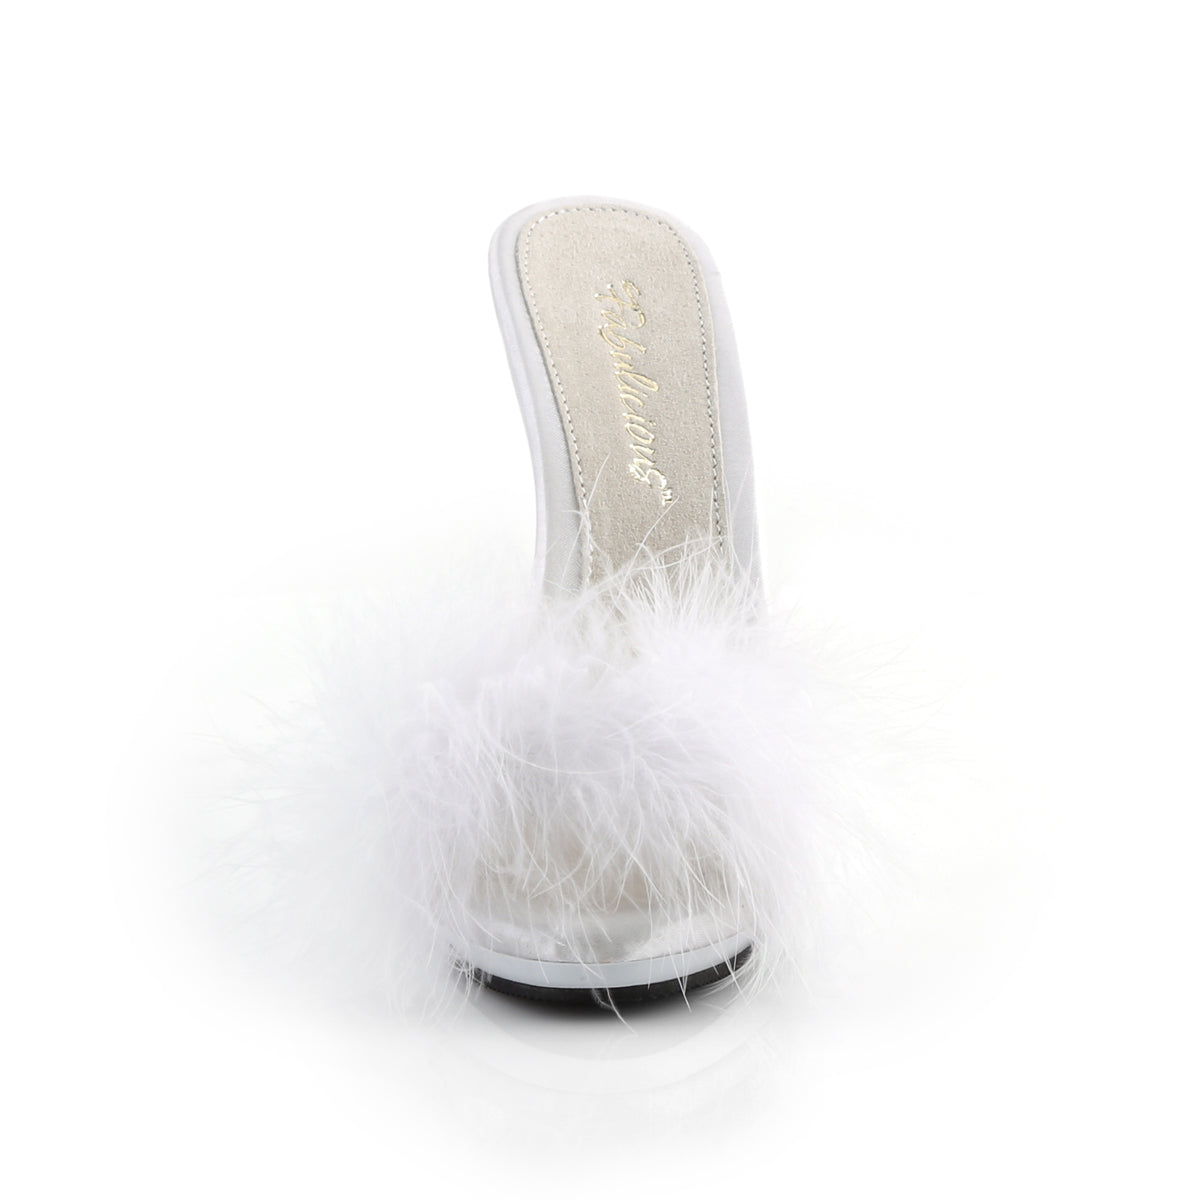 POISE-501F Fabulicious 5 Inch Heel White Satin Fur Sexy Shoe-Fabulicious- Sexy Shoes Alternative Footwear